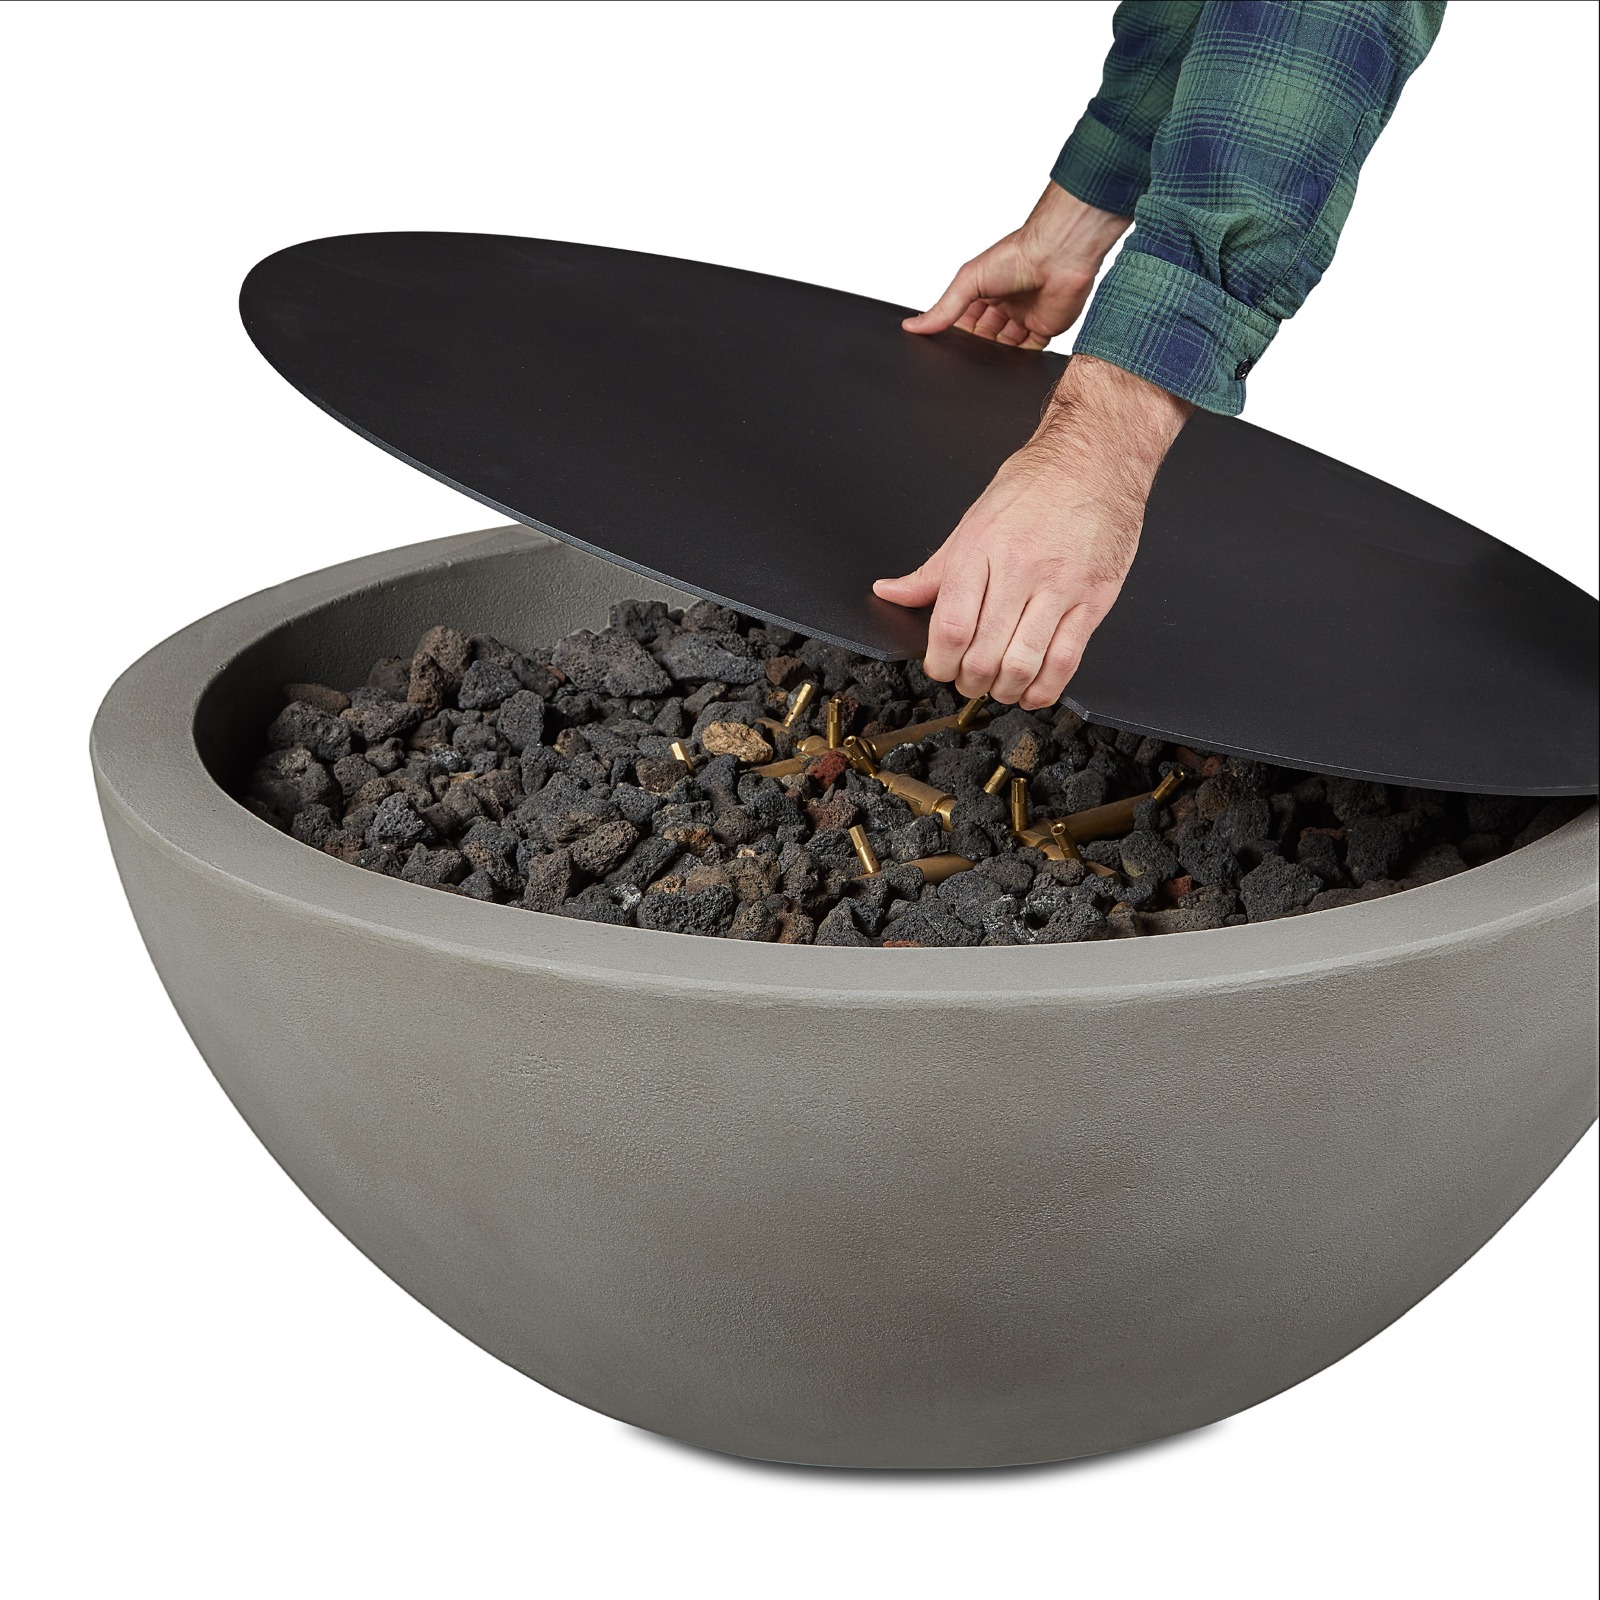 Eldora 42" Round Steel Lid Protective Cover for Propane or Natural Gas Fire Pit Fire Bowl Fire Table Outdoor Fireplace